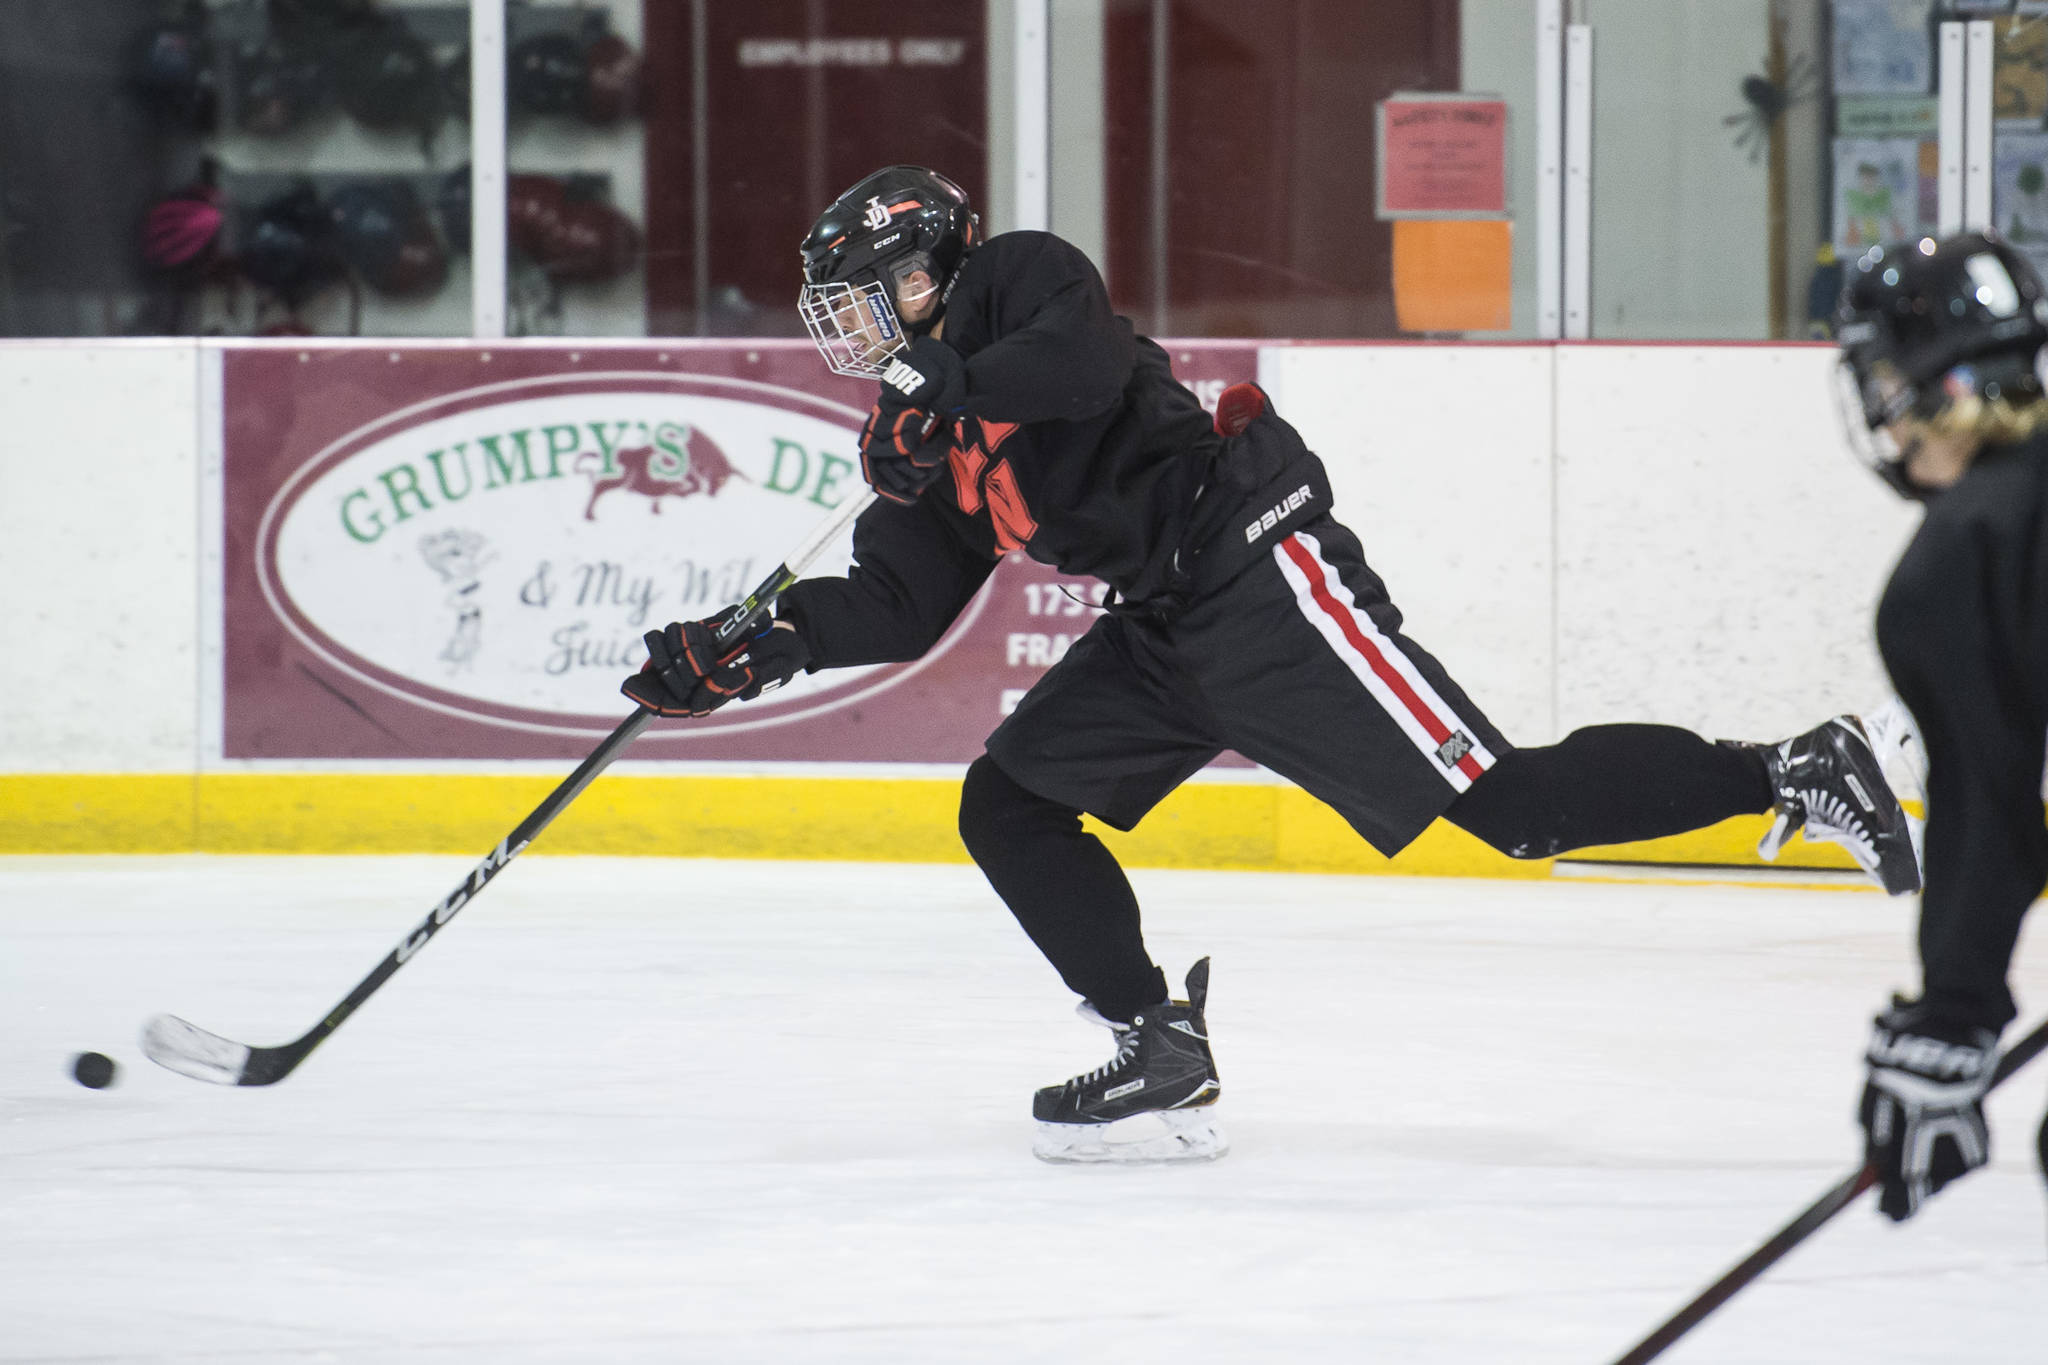 Senior Bill Bossse shoots to the goal during Juneau-Douglas High School hockey practice at Treadwell Arena on Thursday, Nov. 1, 2018. Bosse, who broke his jaw in a game earlier this season, leads the team with 14 goals and eight assists. (Michael Penn | Juneau Empire File)